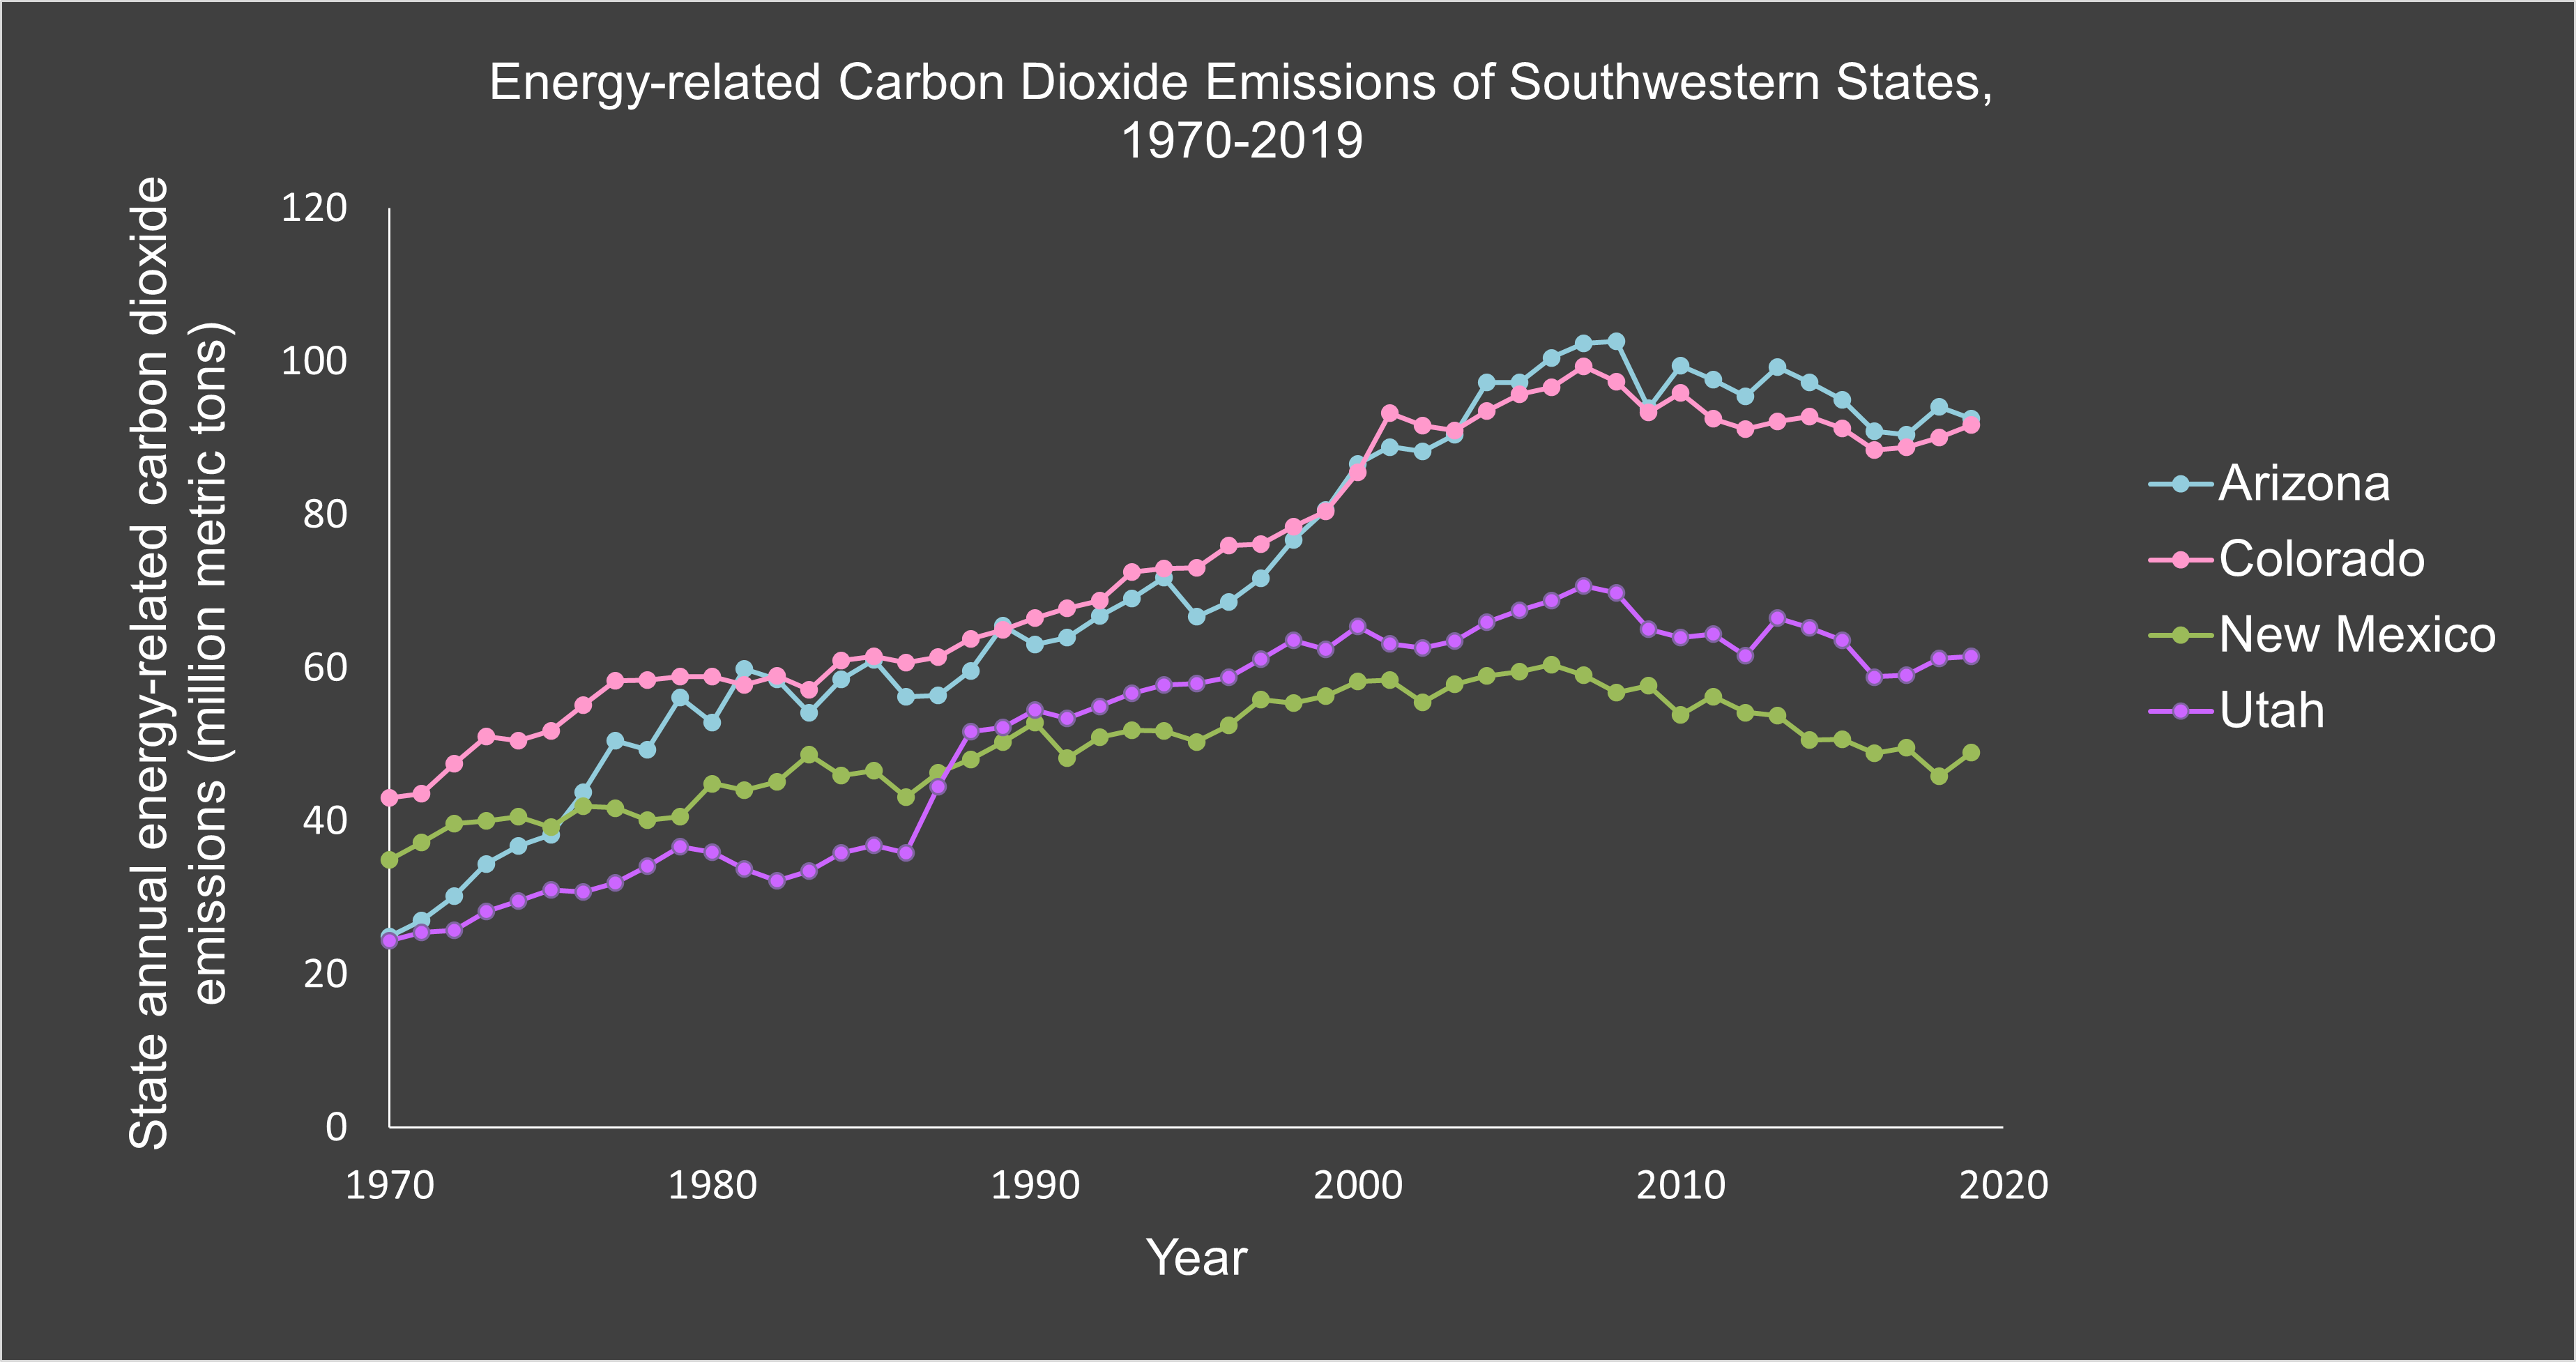 Graph of energy-related carbon dioxide emisssions from southwestern states from 1970 to 2019, showing increased emsisions until around 2008, followed by a decreasing trend.